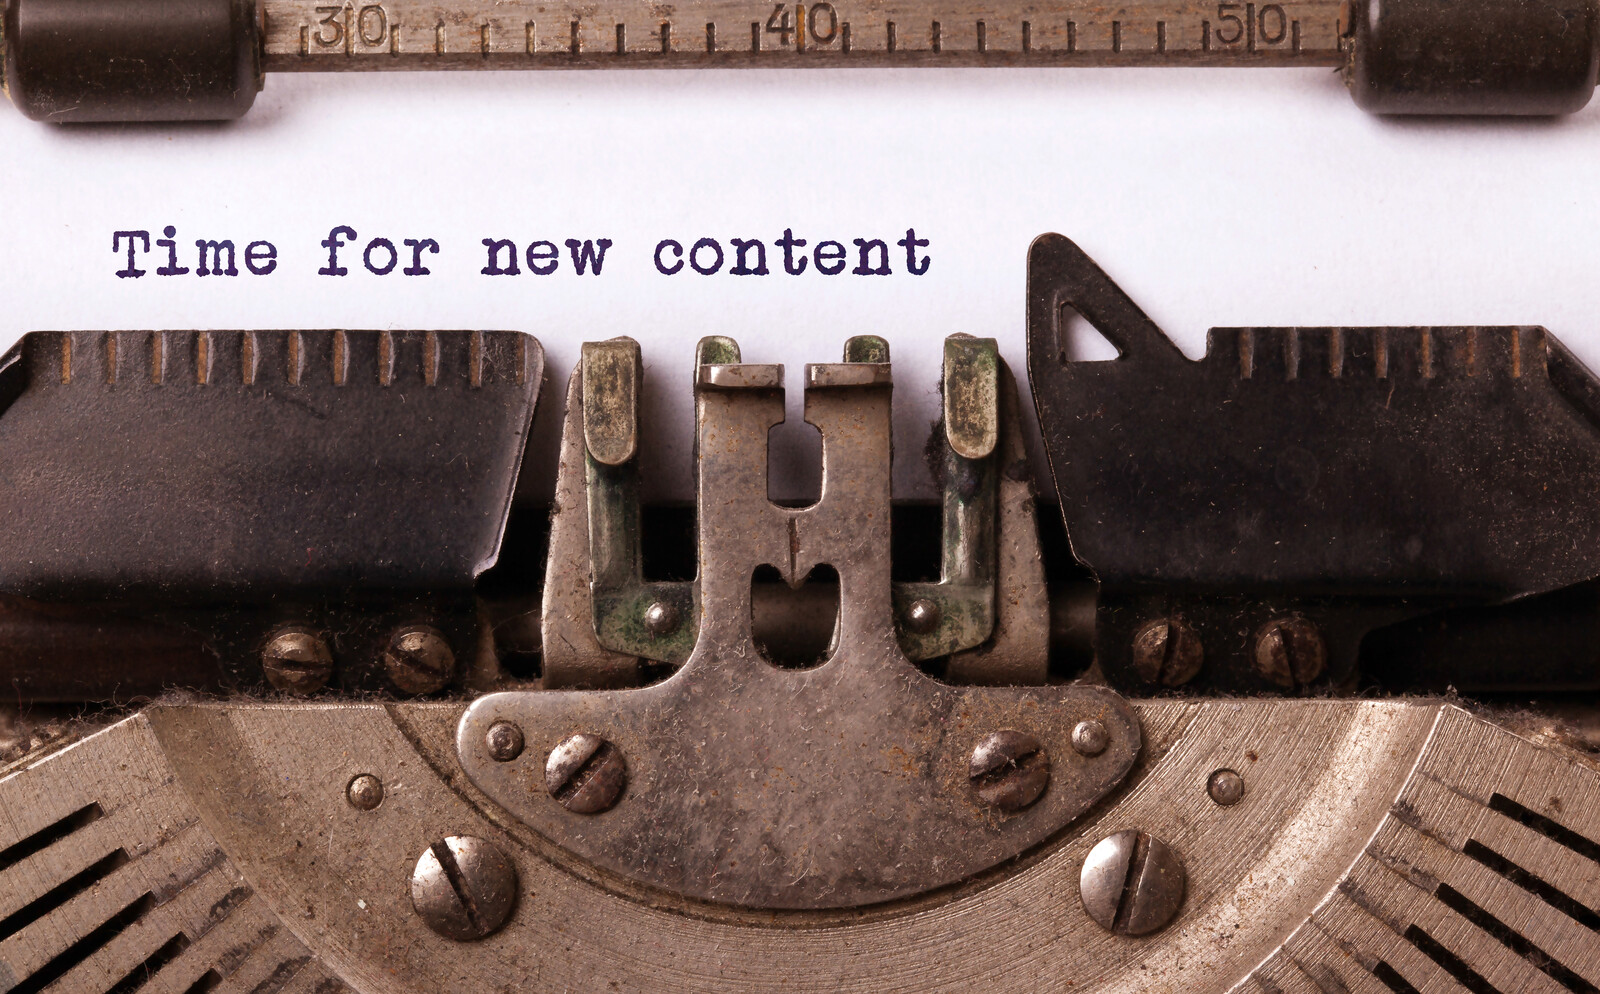 Fresh content for your law firm website